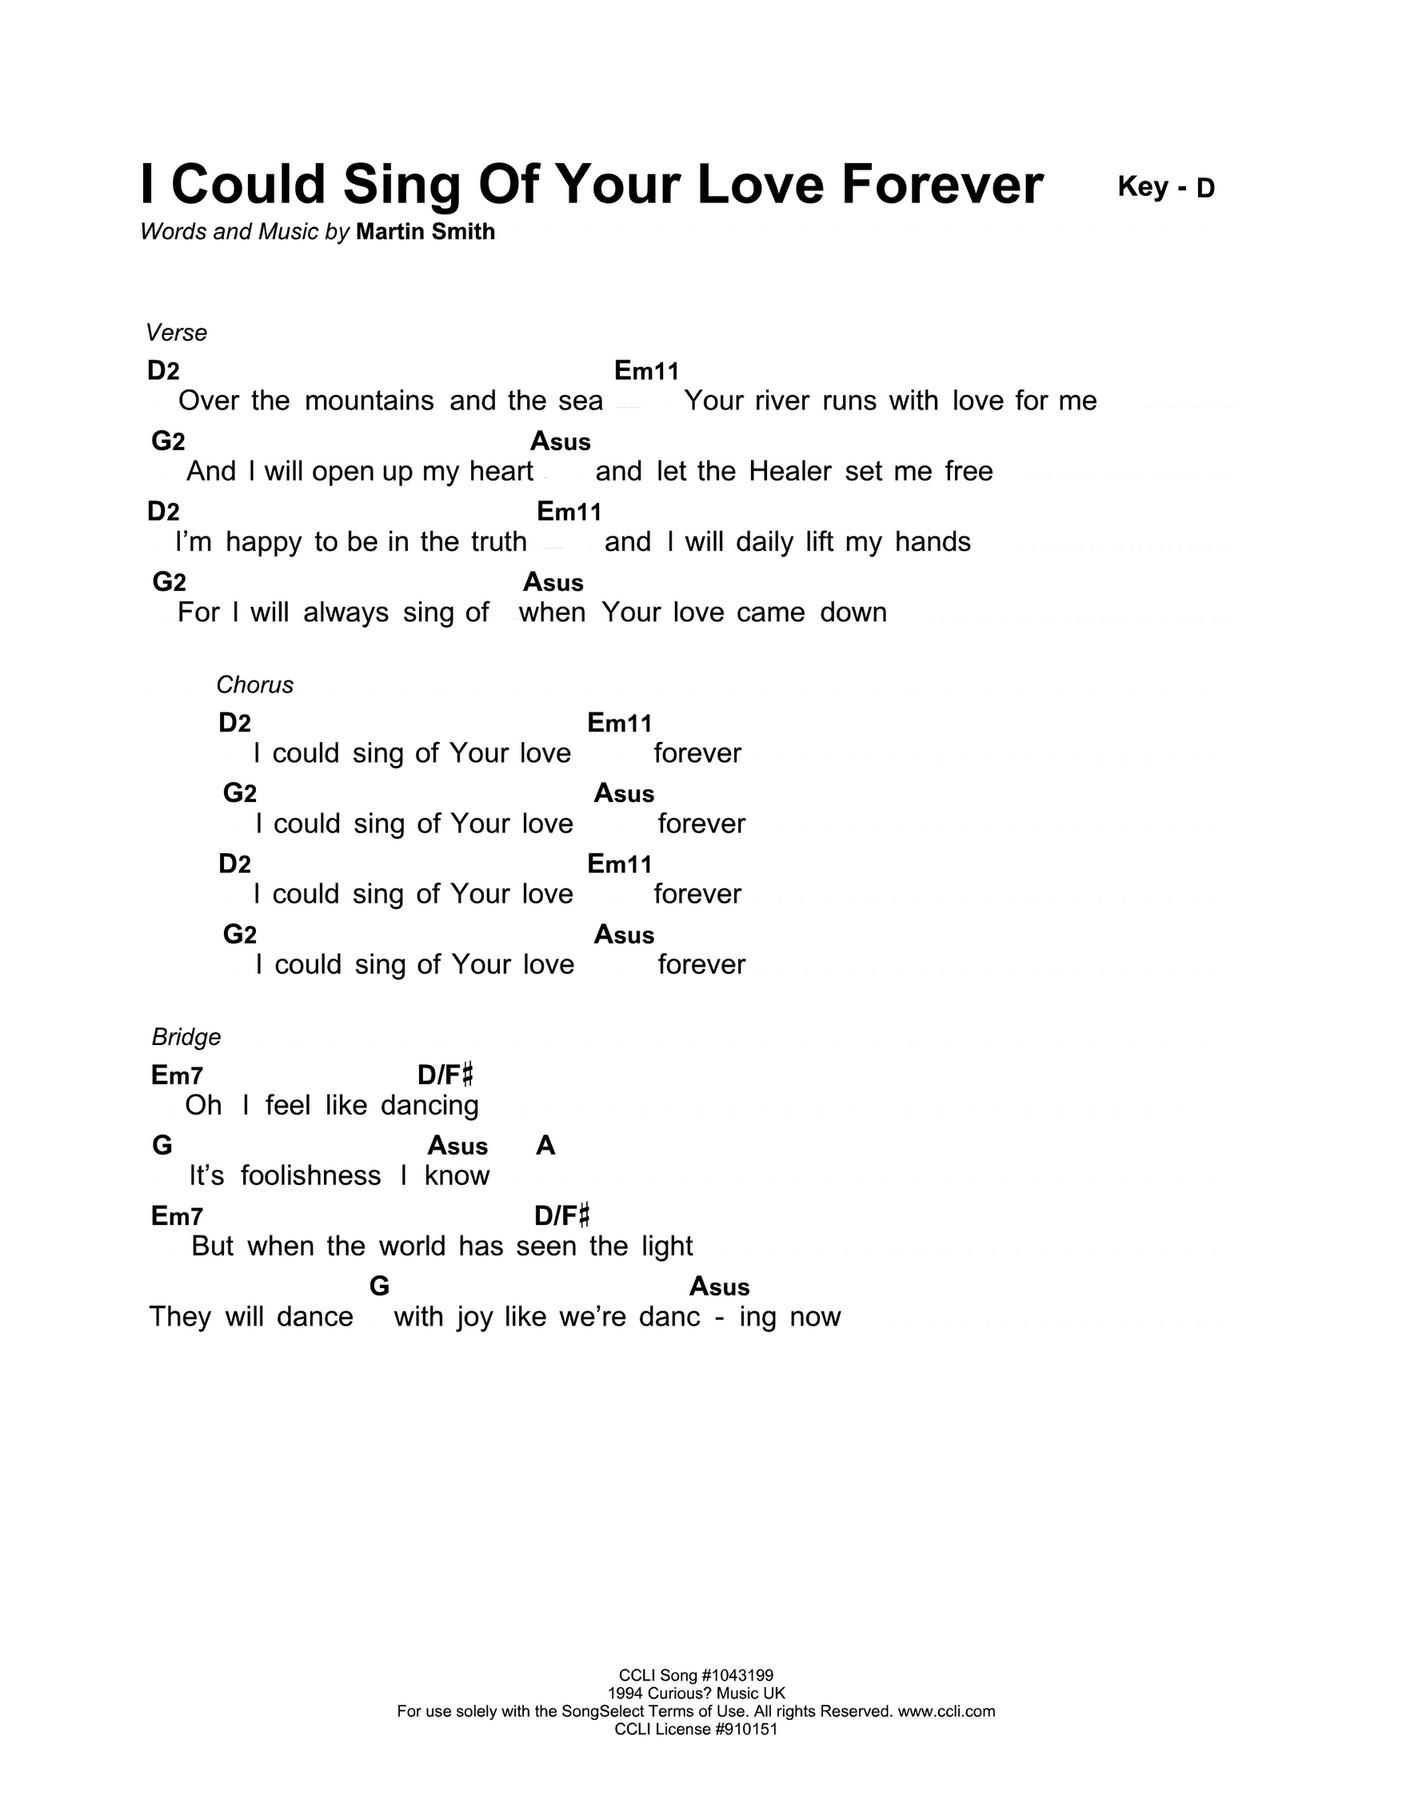 I Could Sing Of Your Love Forever Lyrics and Chords